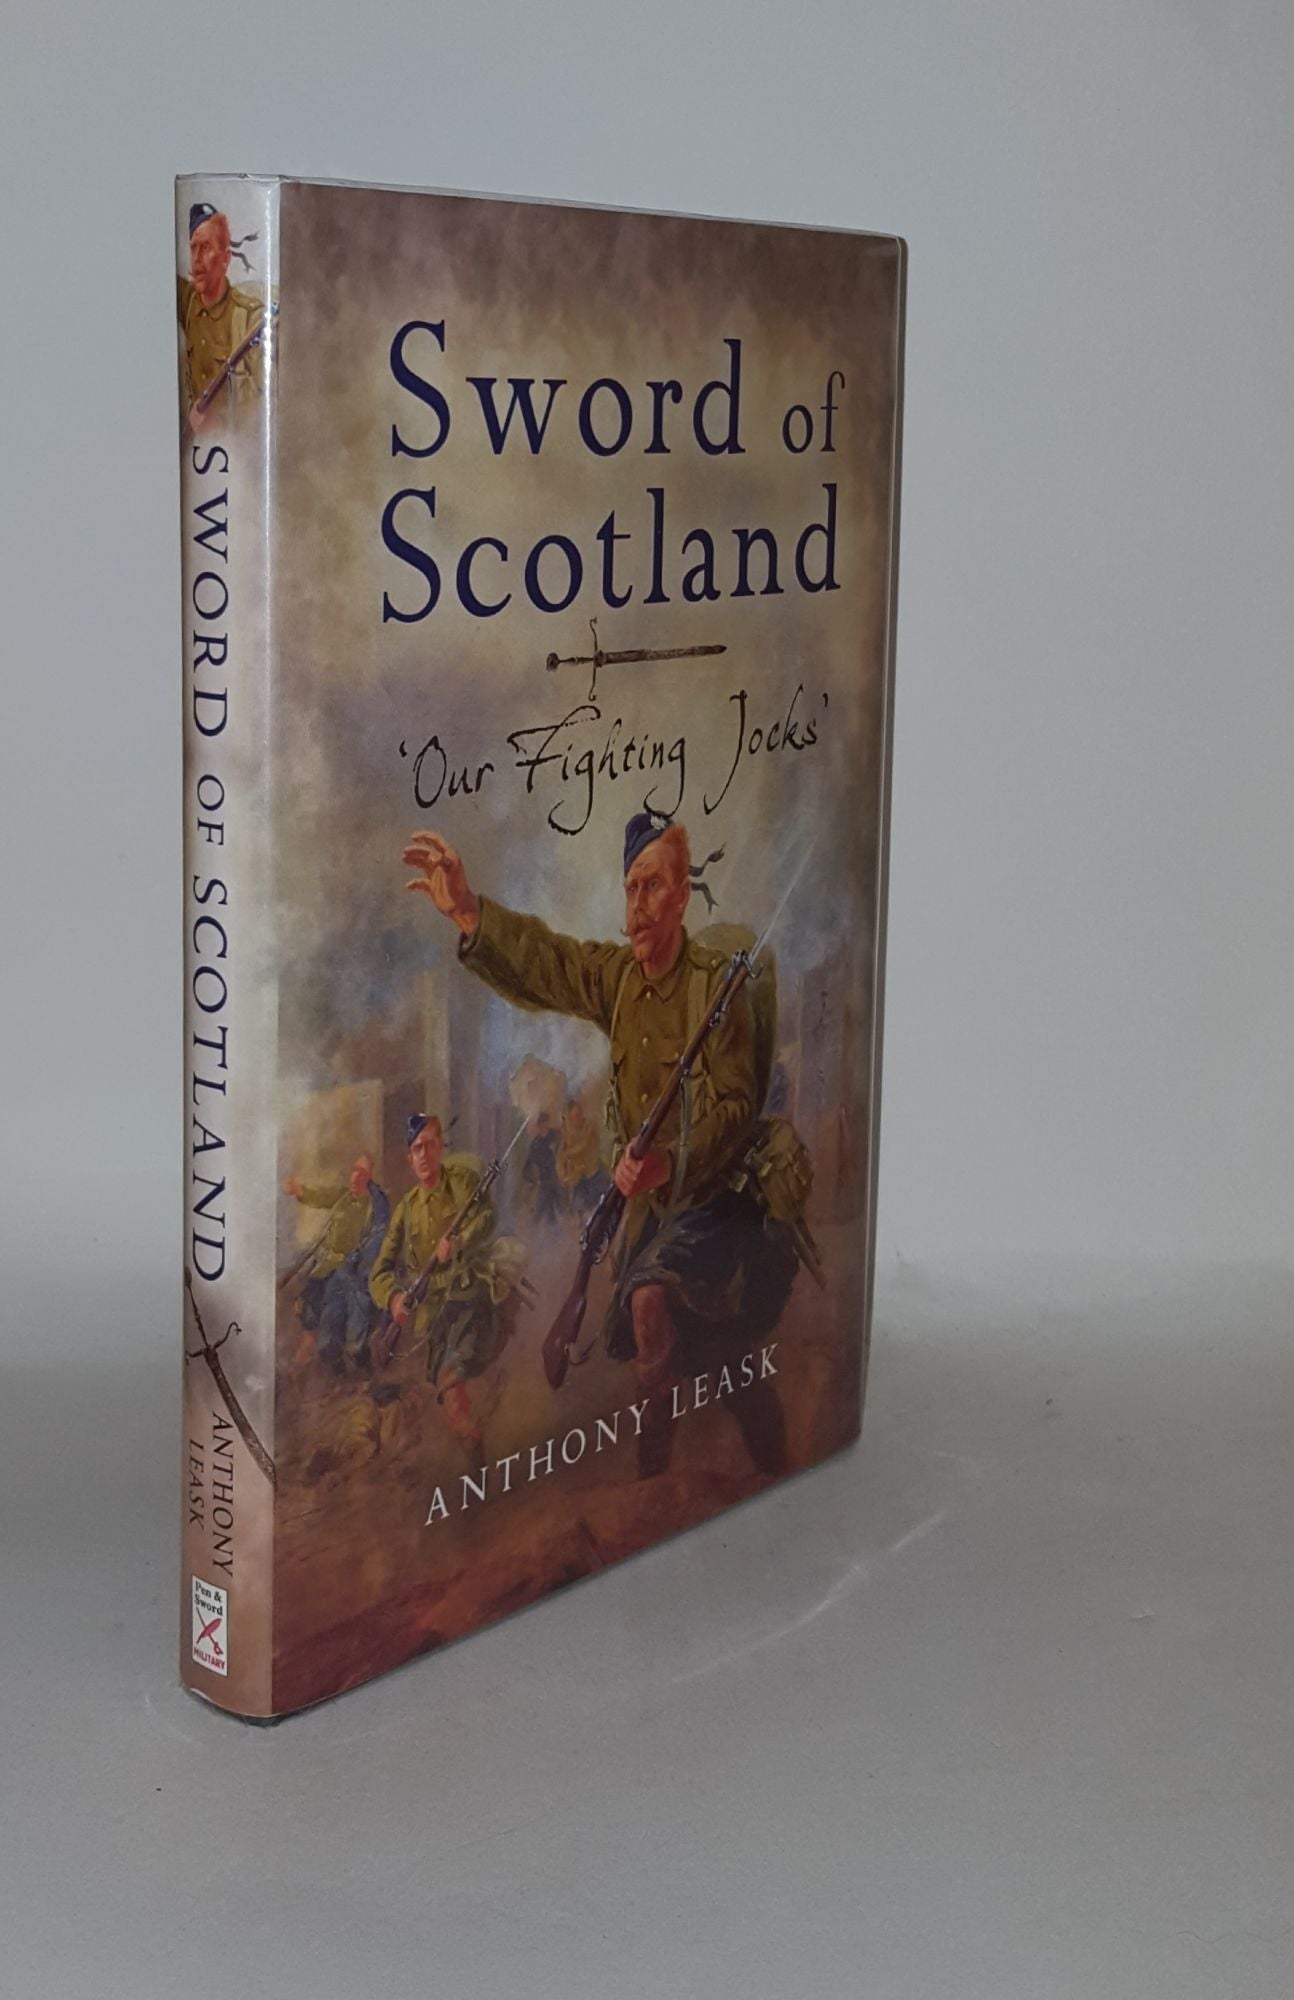 LEASK Anthony - Sword of Scotland Our Fighting Jocks